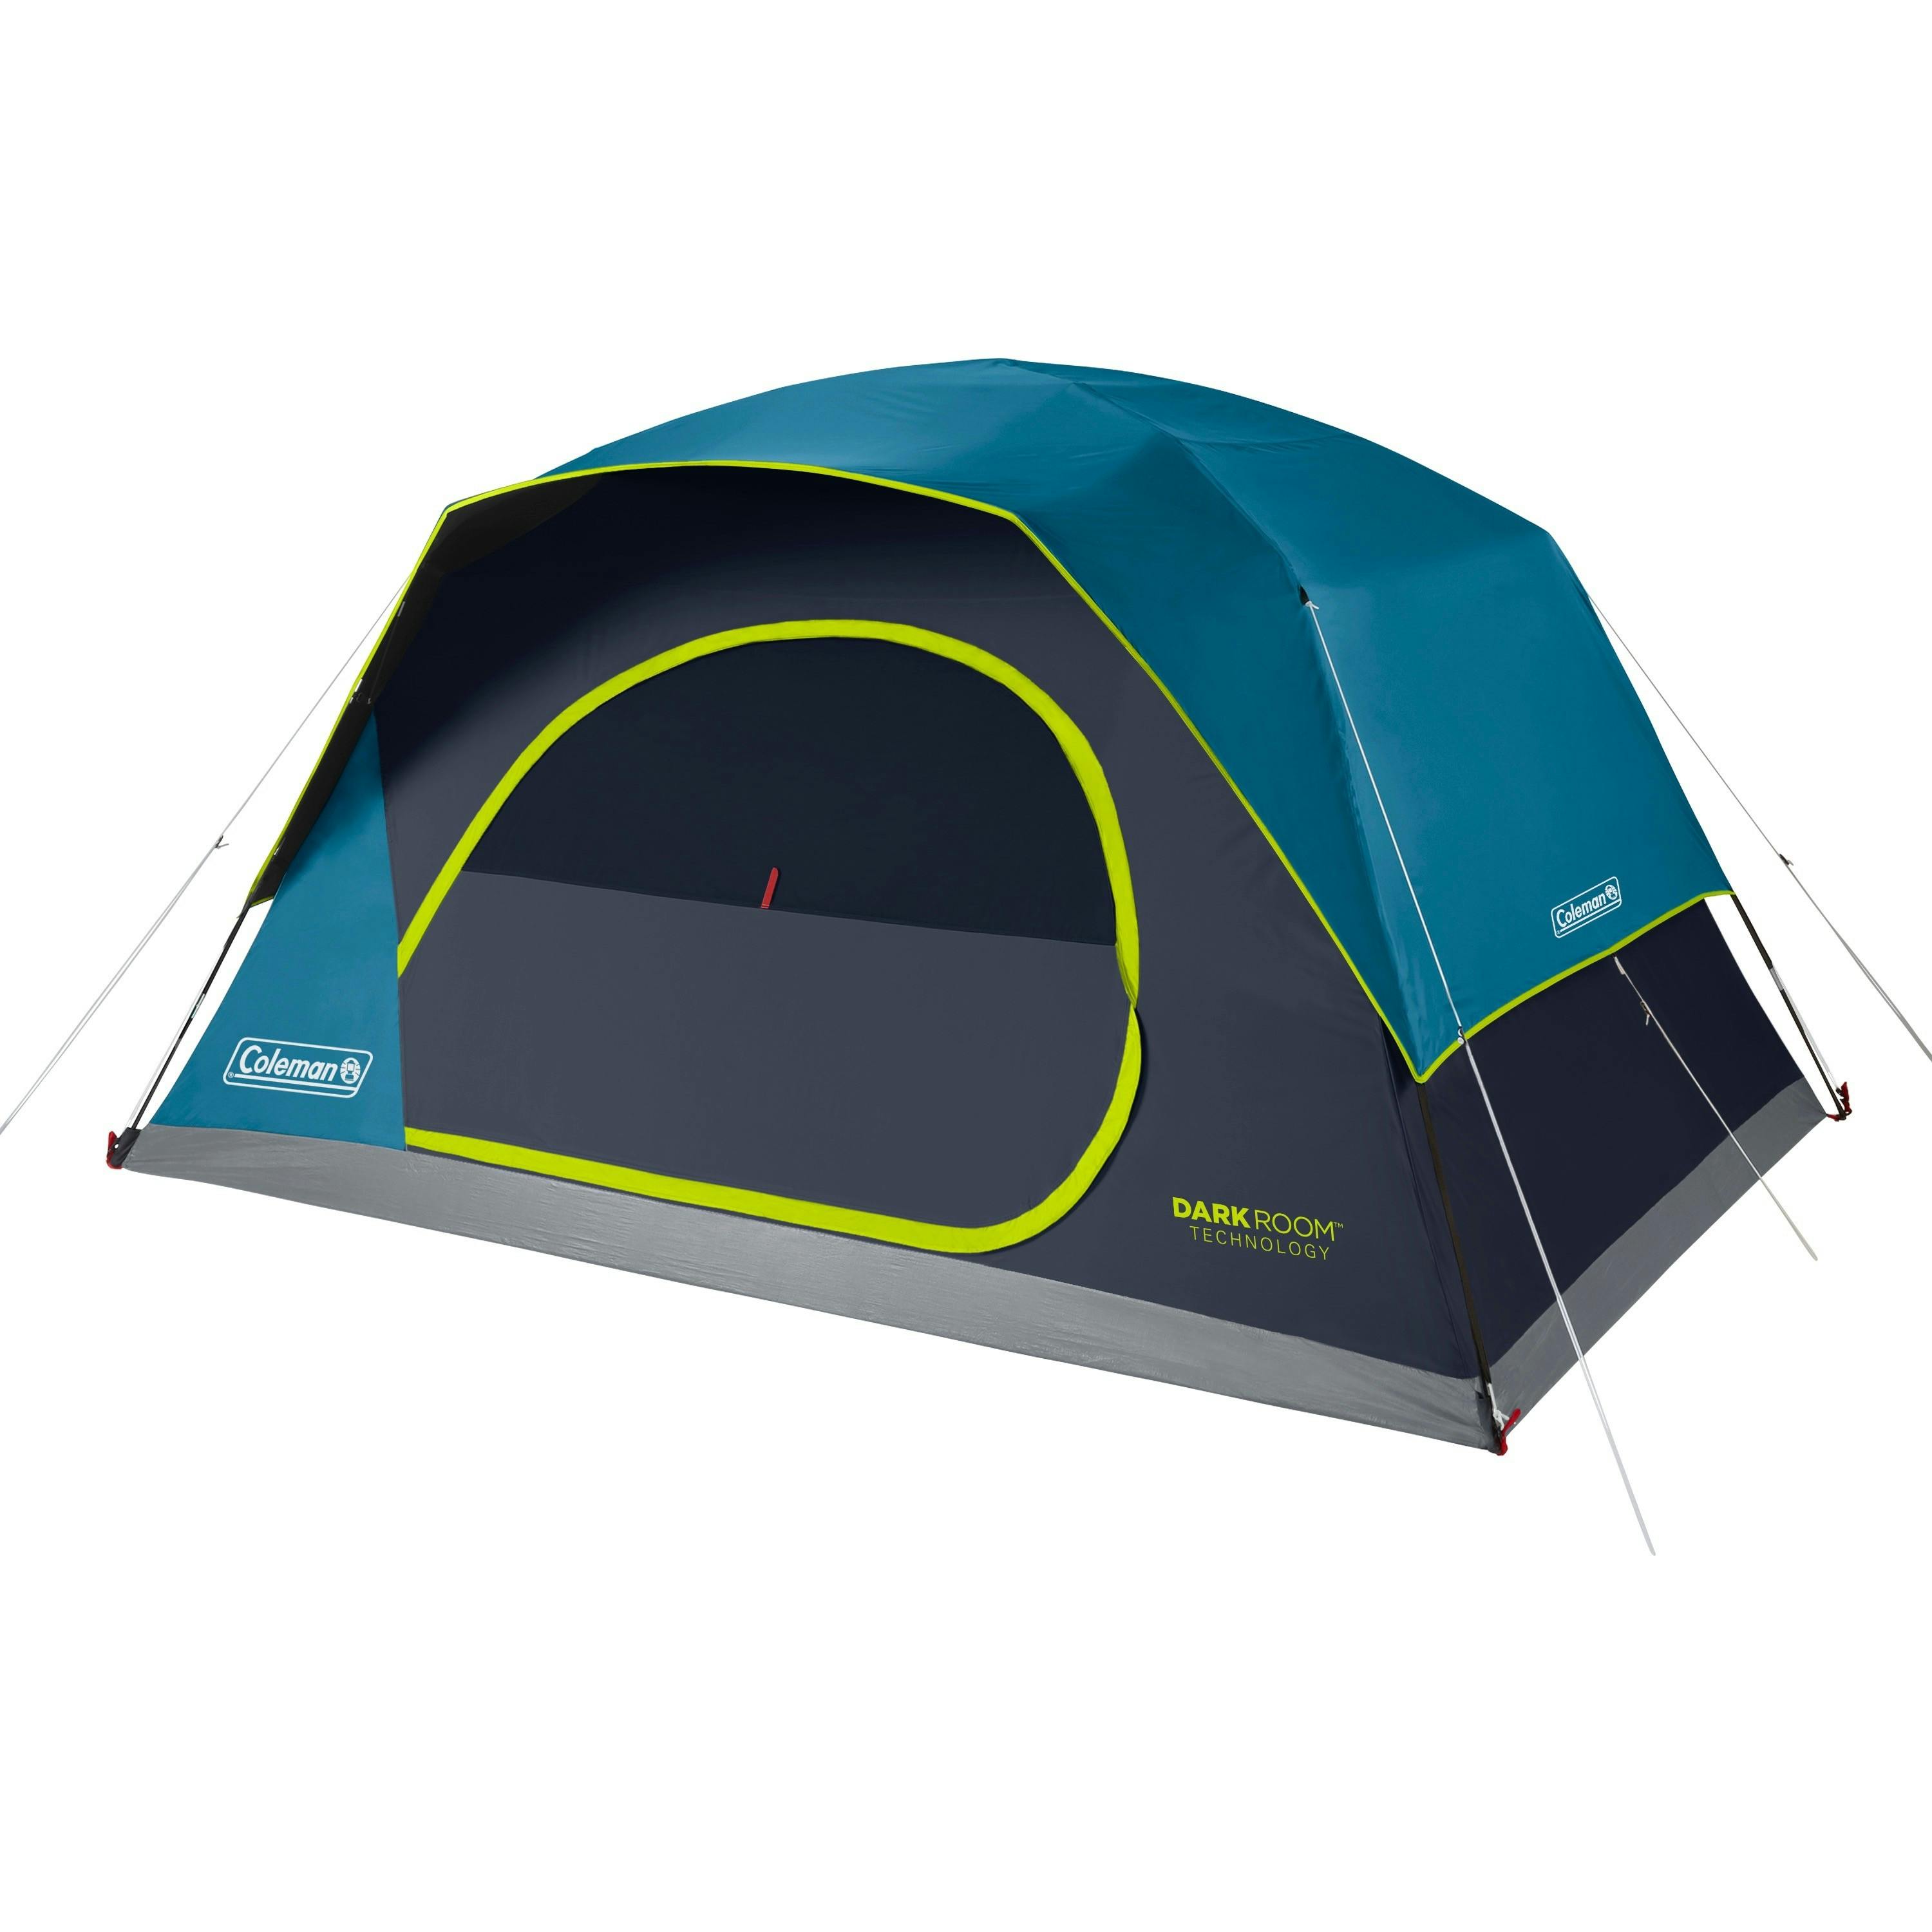 Coleman Skydome Camping Tent with Dark Room Technology · 8 Person